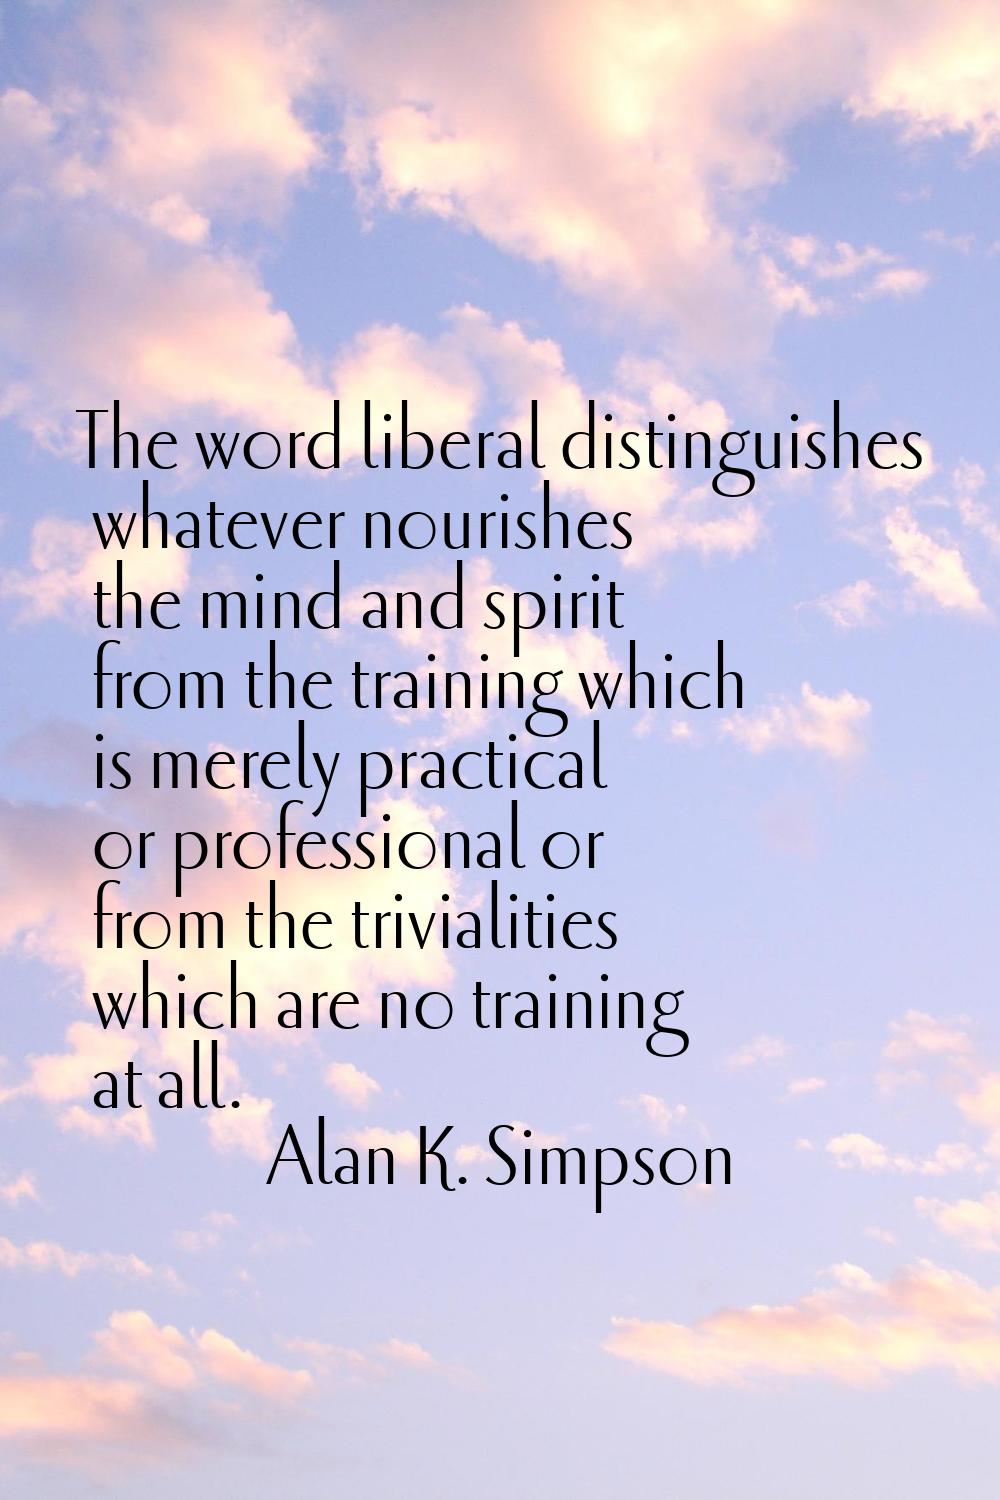 The word liberal distinguishes whatever nourishes the mind and spirit from the training which is me